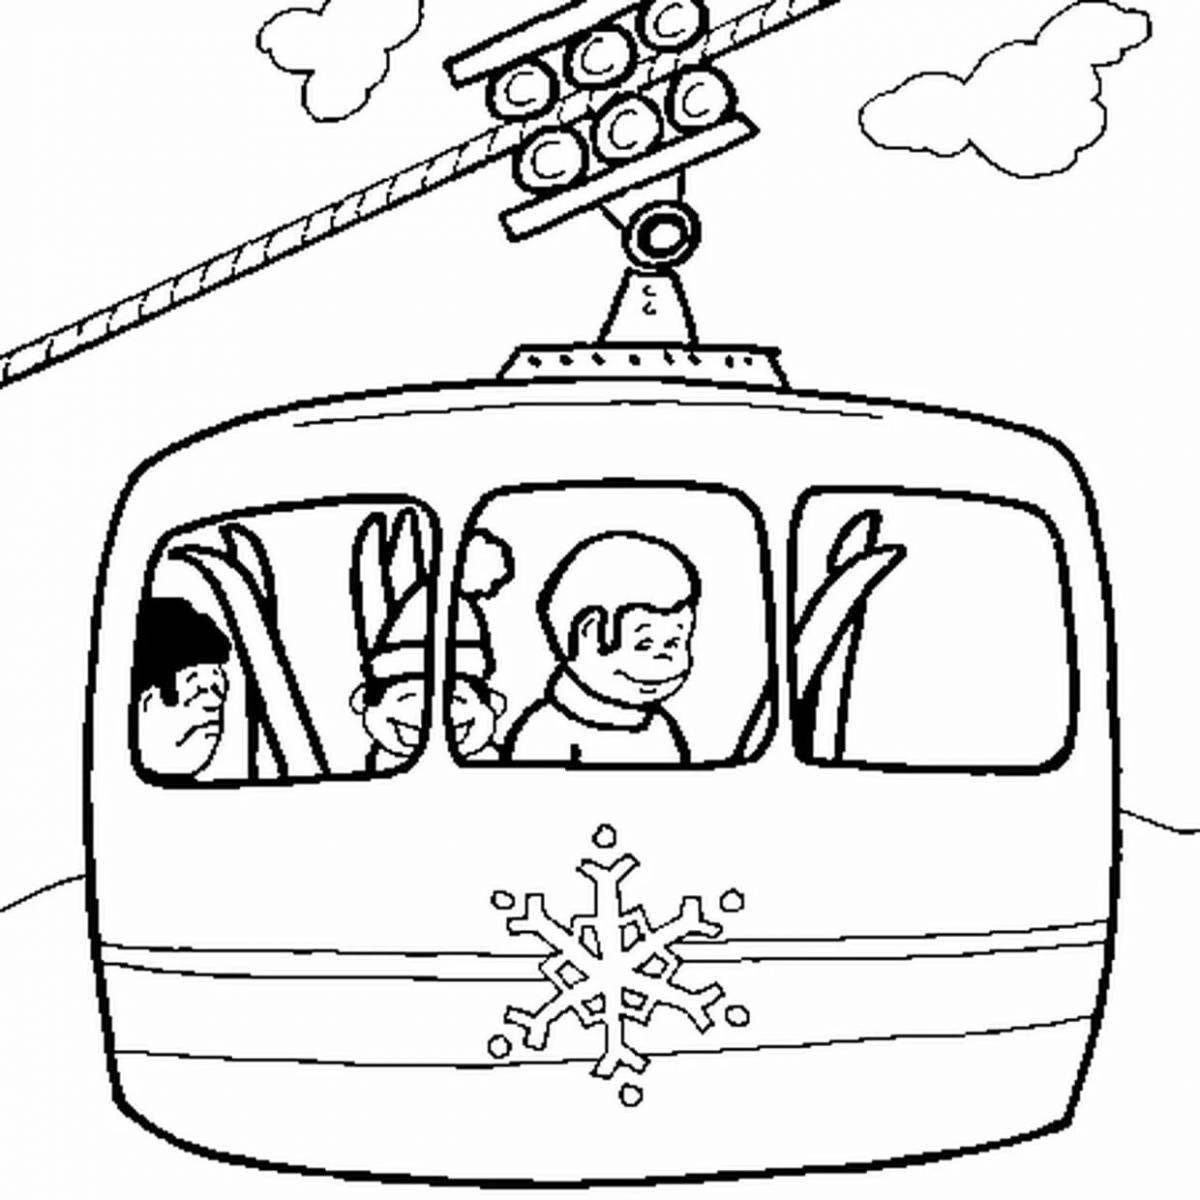 Coloring book dazzling cable car